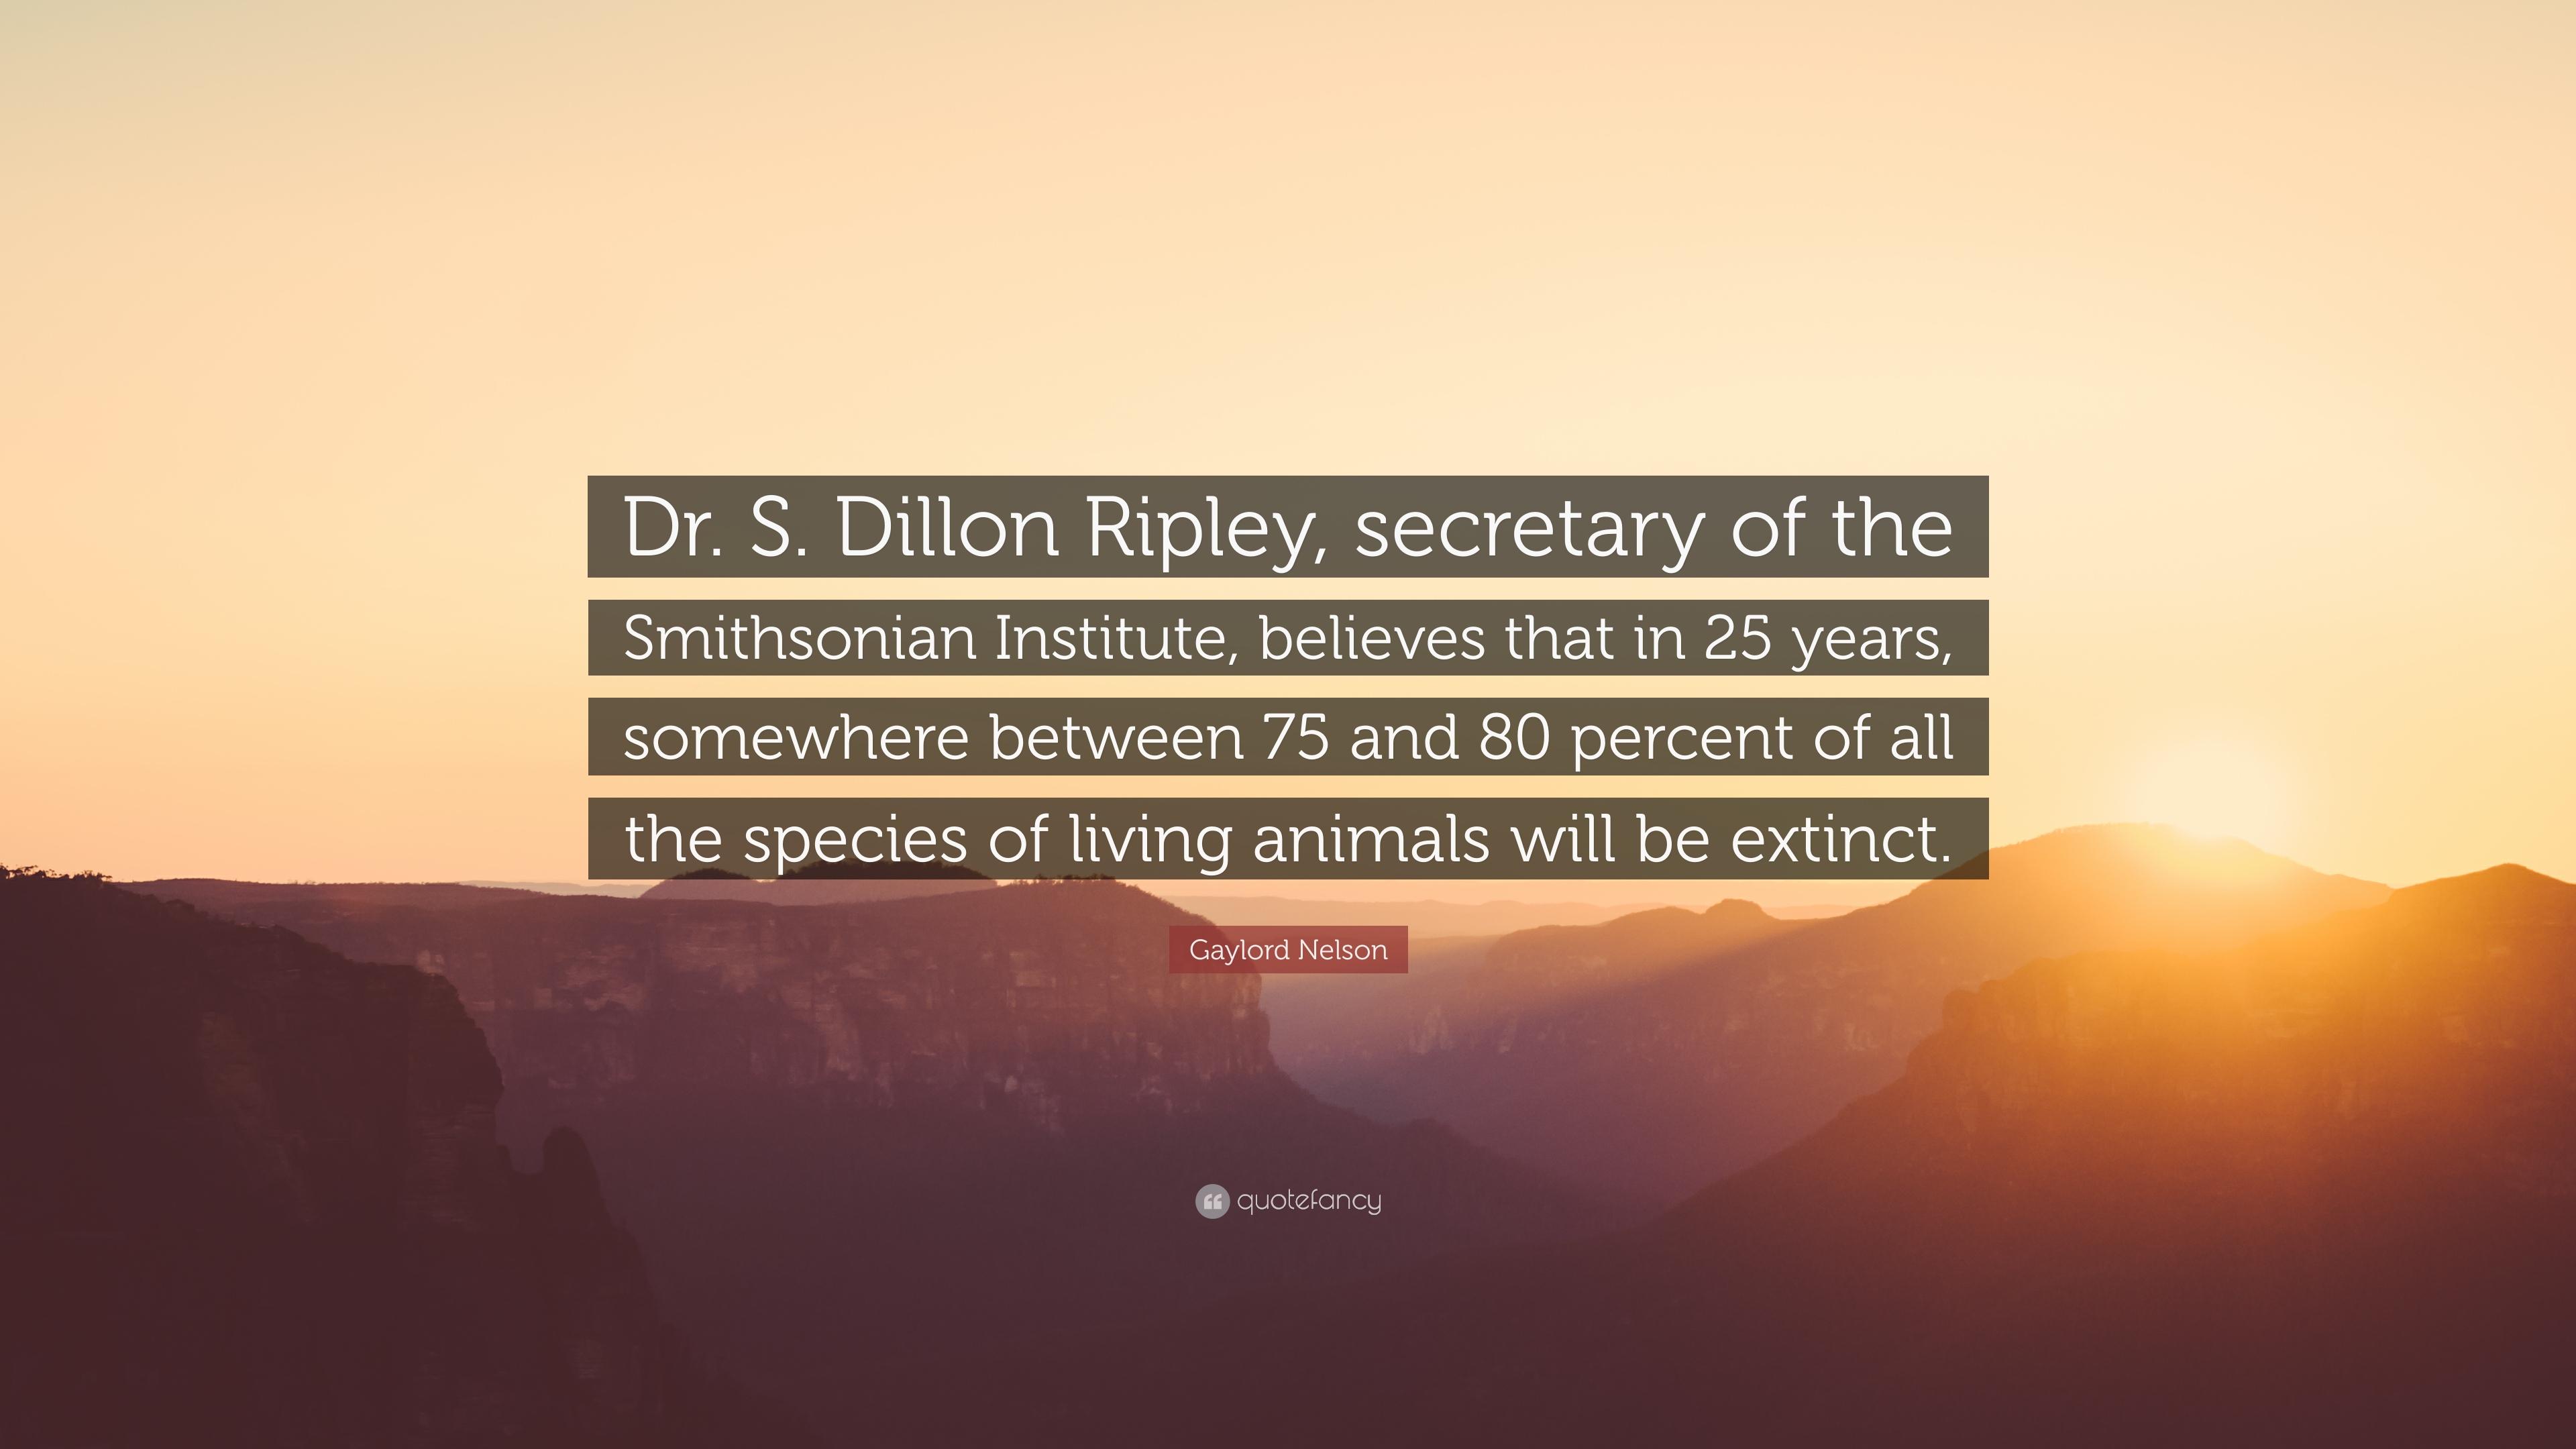 Gaylord Nelson Quote: “Dr. S. Dillon Ripley, secretary